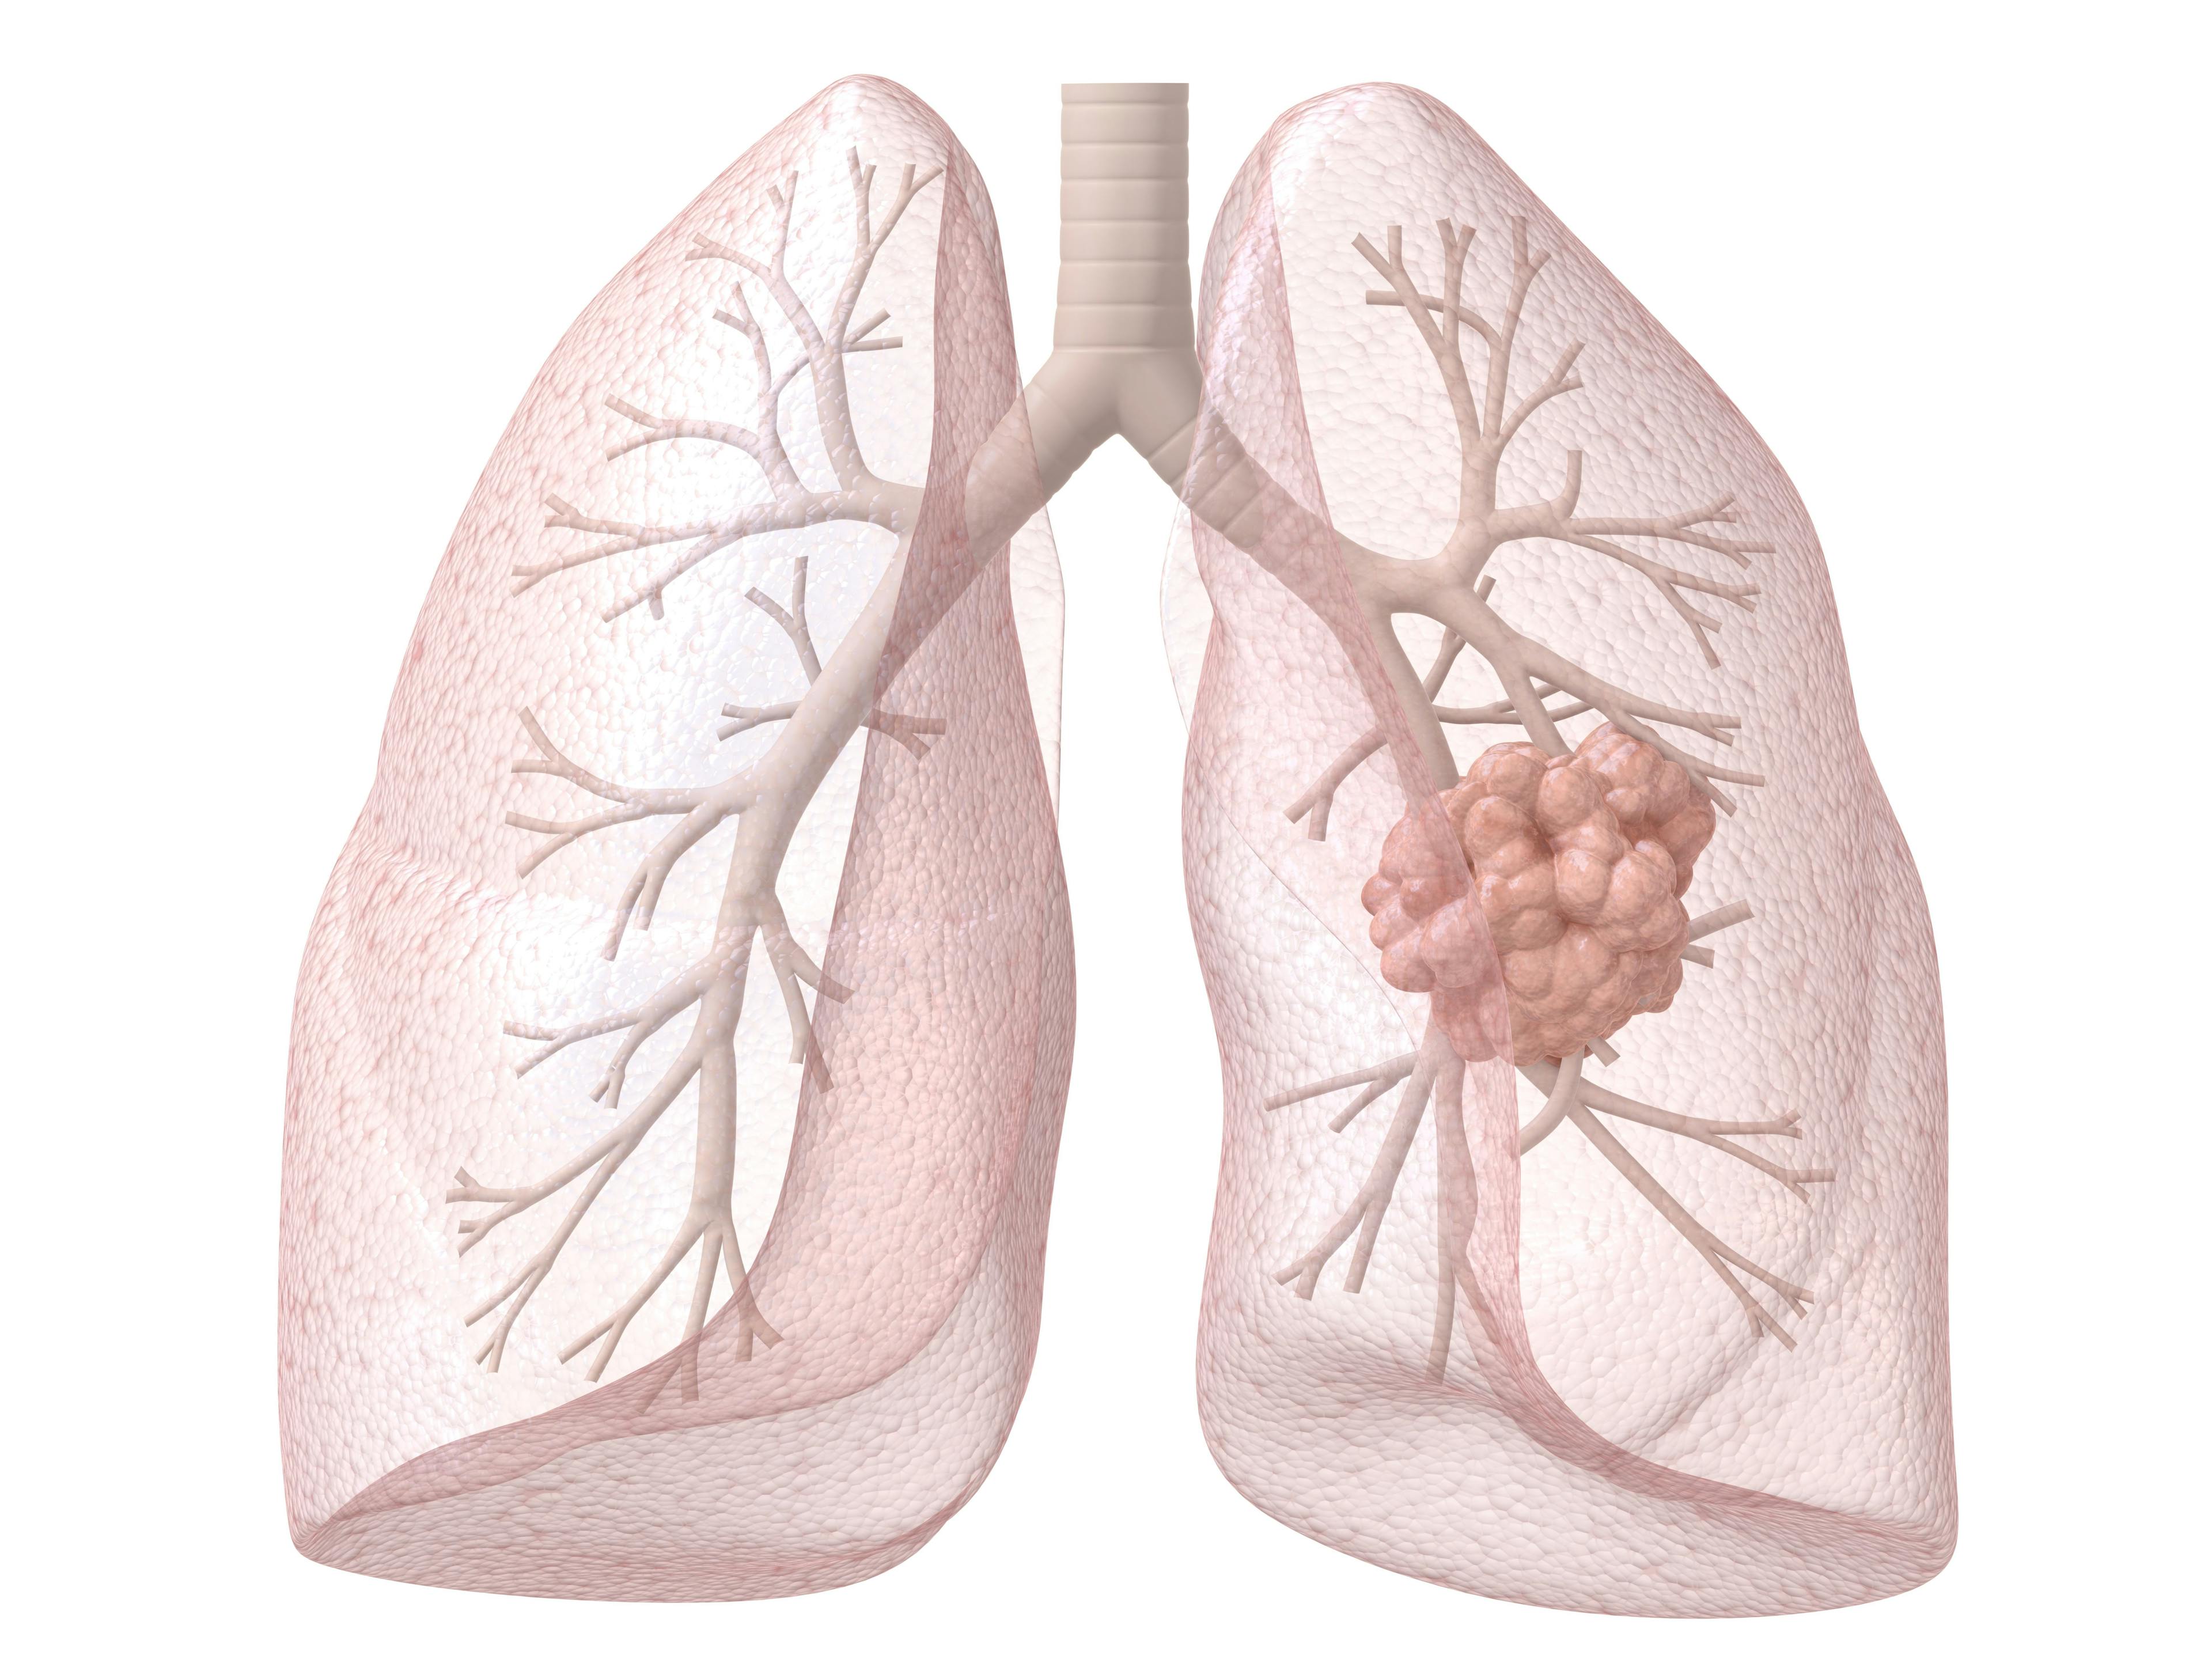 The New Era In Lung Cancer Care